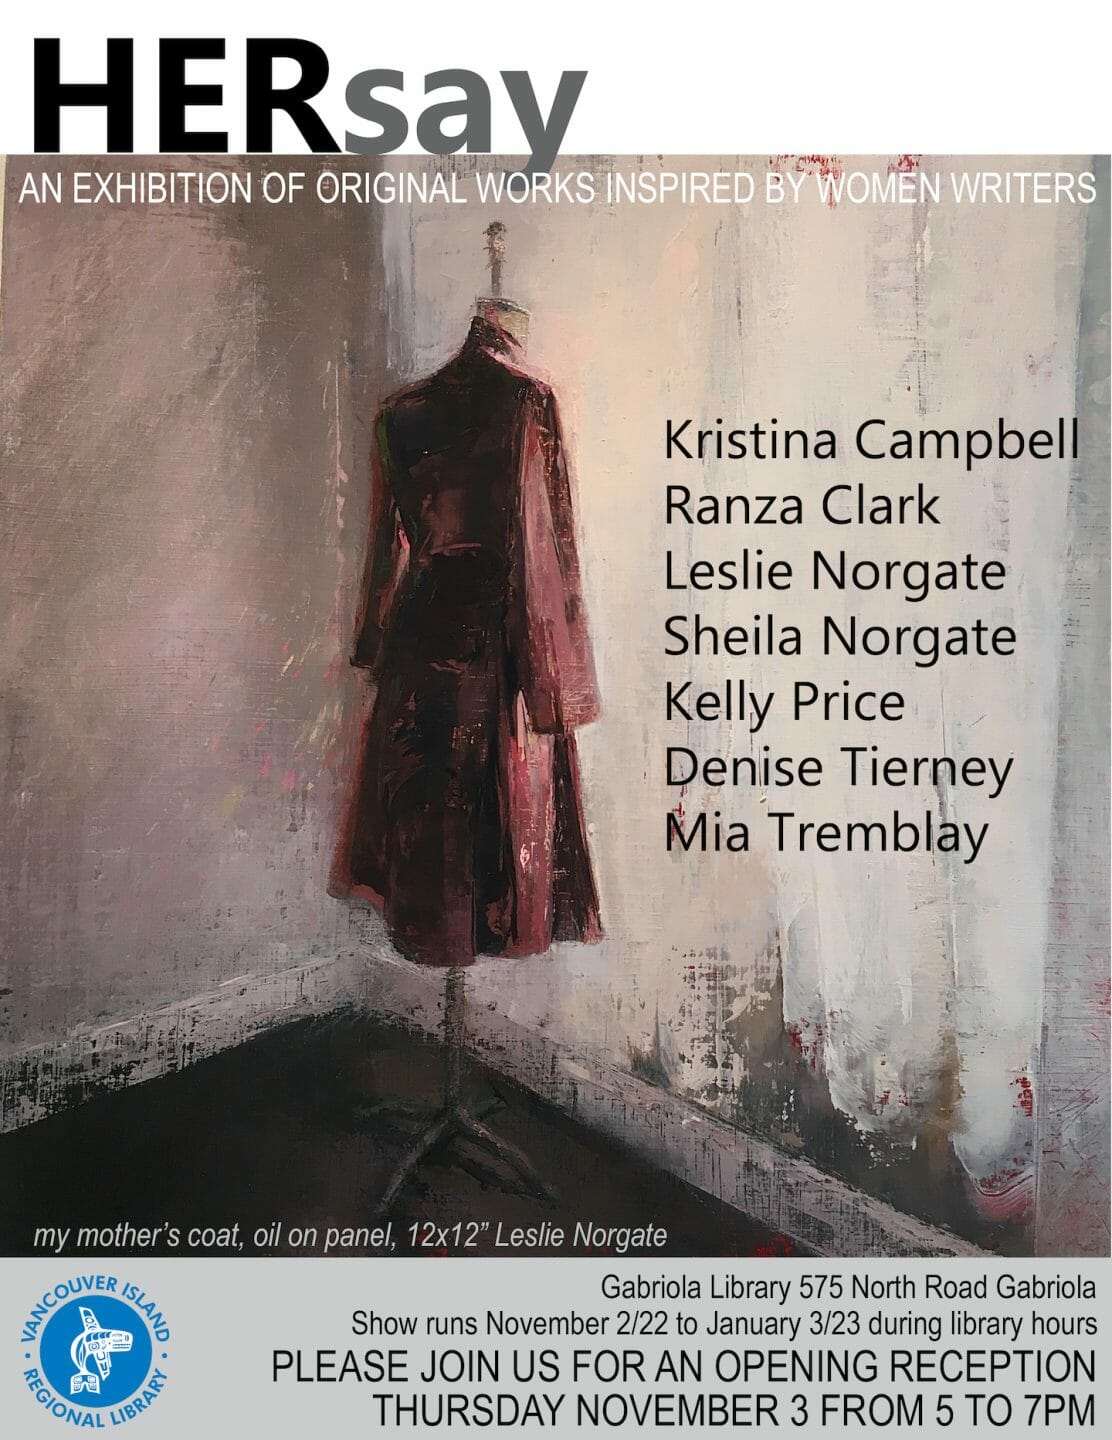 HERsay show poster featuring My Mother's Coat by Leslie Norgate. The show runs November 2, 2022 to January 3, 2023.